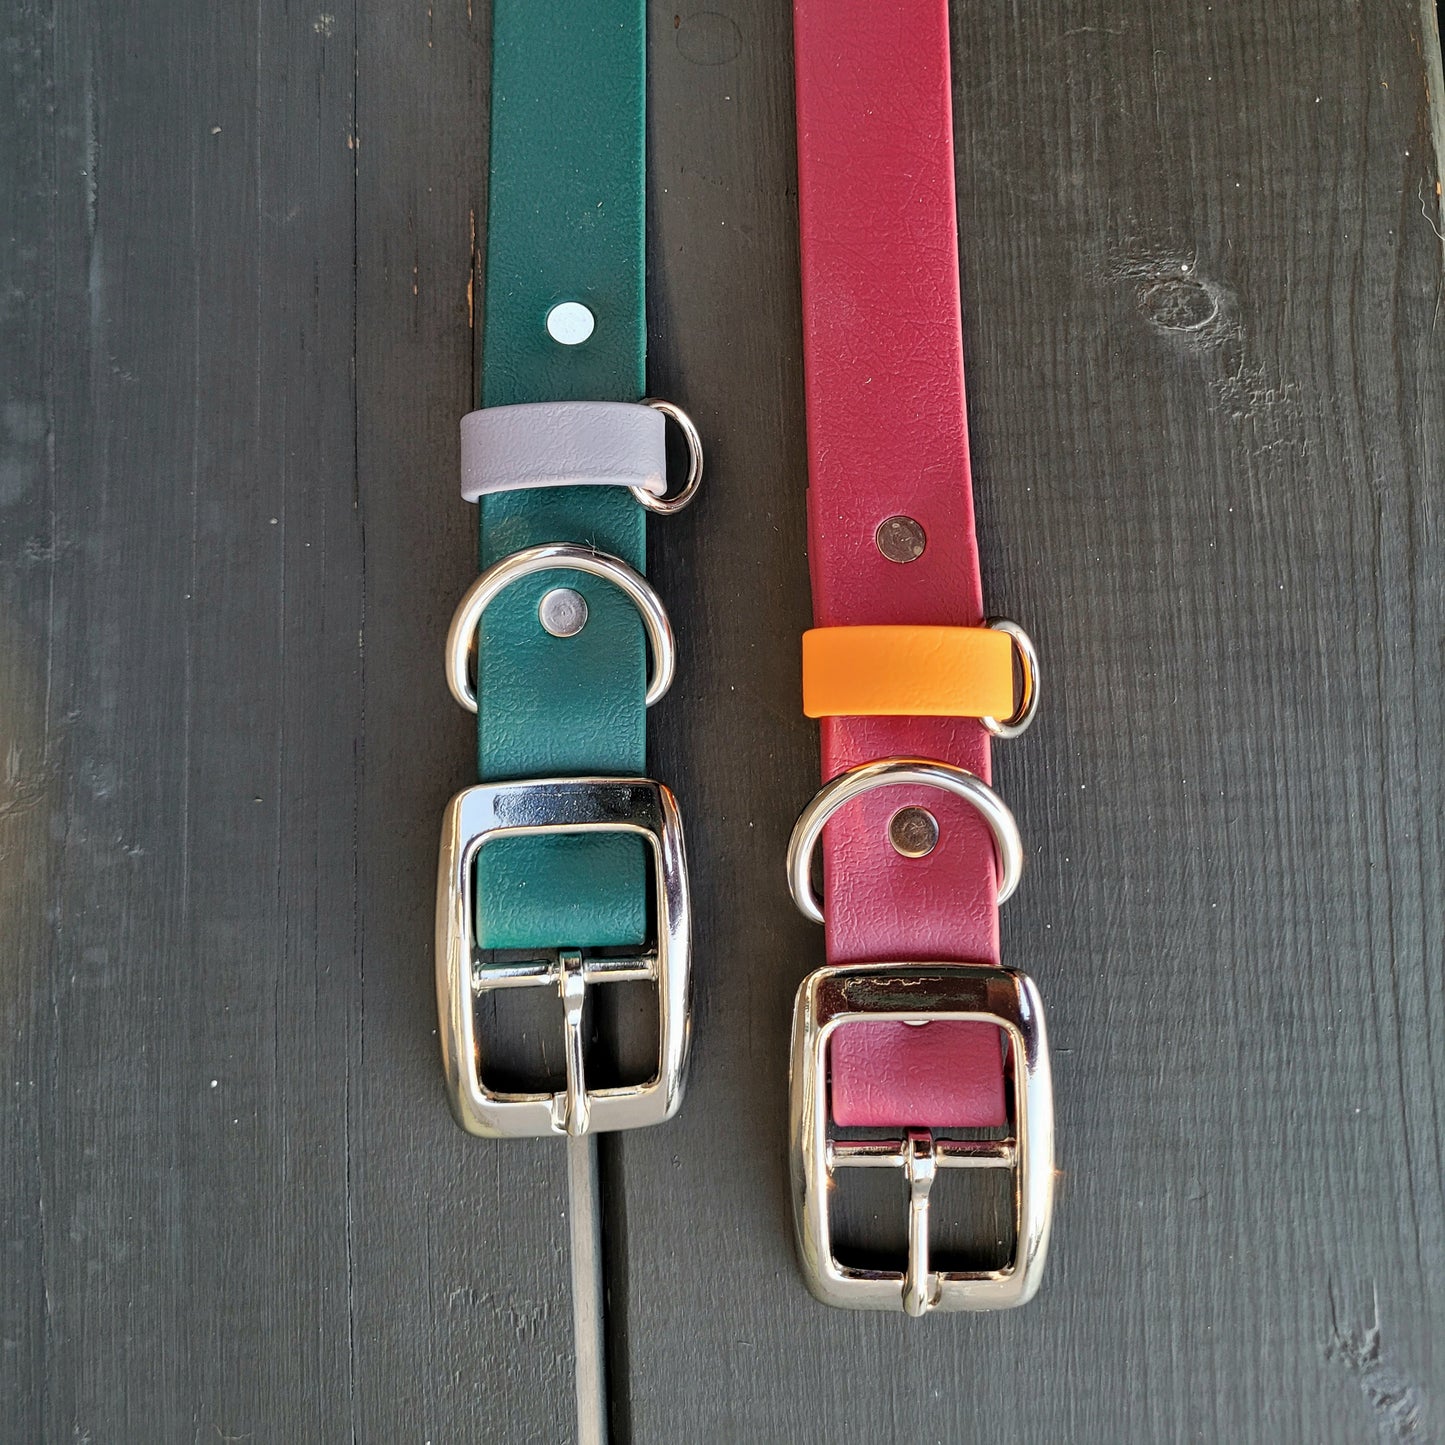 Hunter green with grey strap keeper and red wine with mandarin orange strap keeper